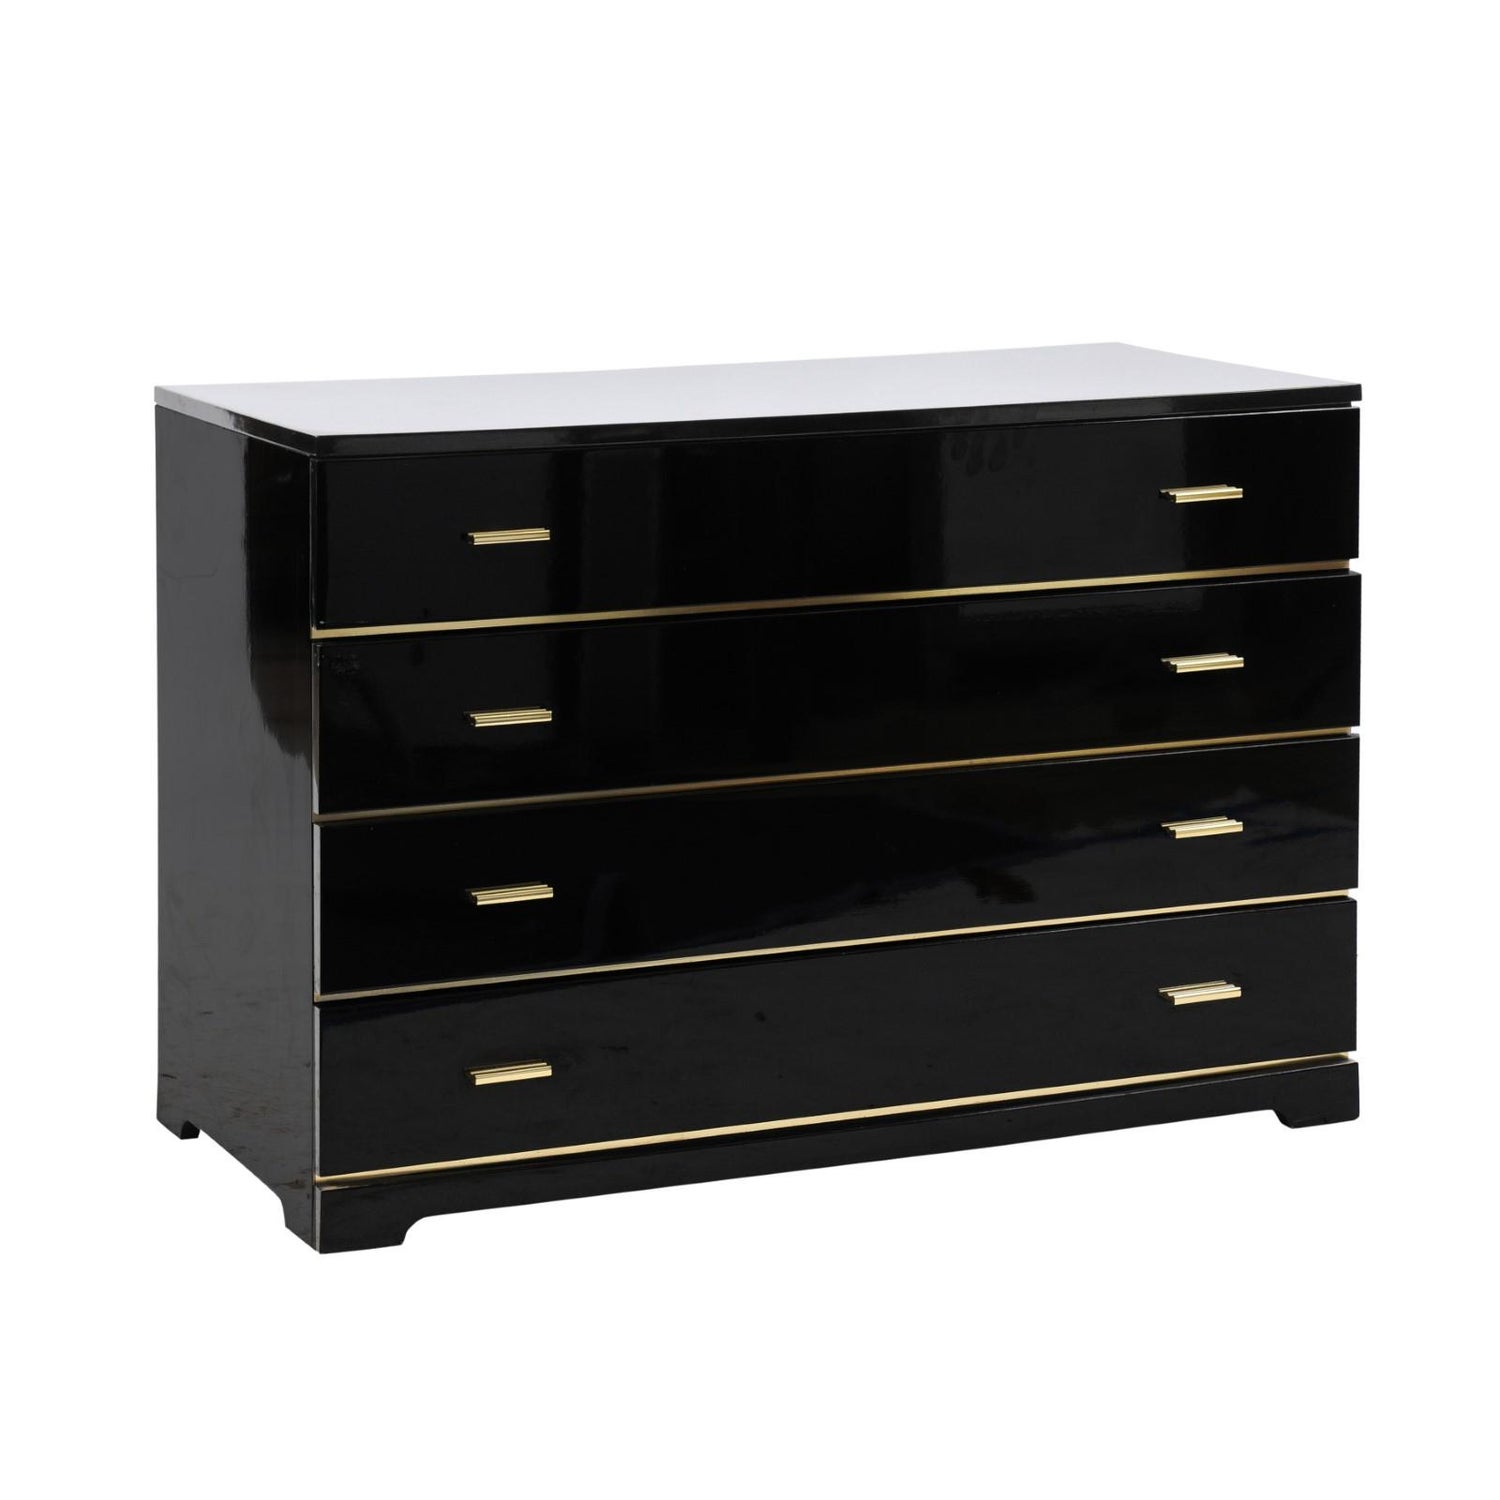 French Roche Bobois 1960s Four Drawer Black Lacquer Dresser With